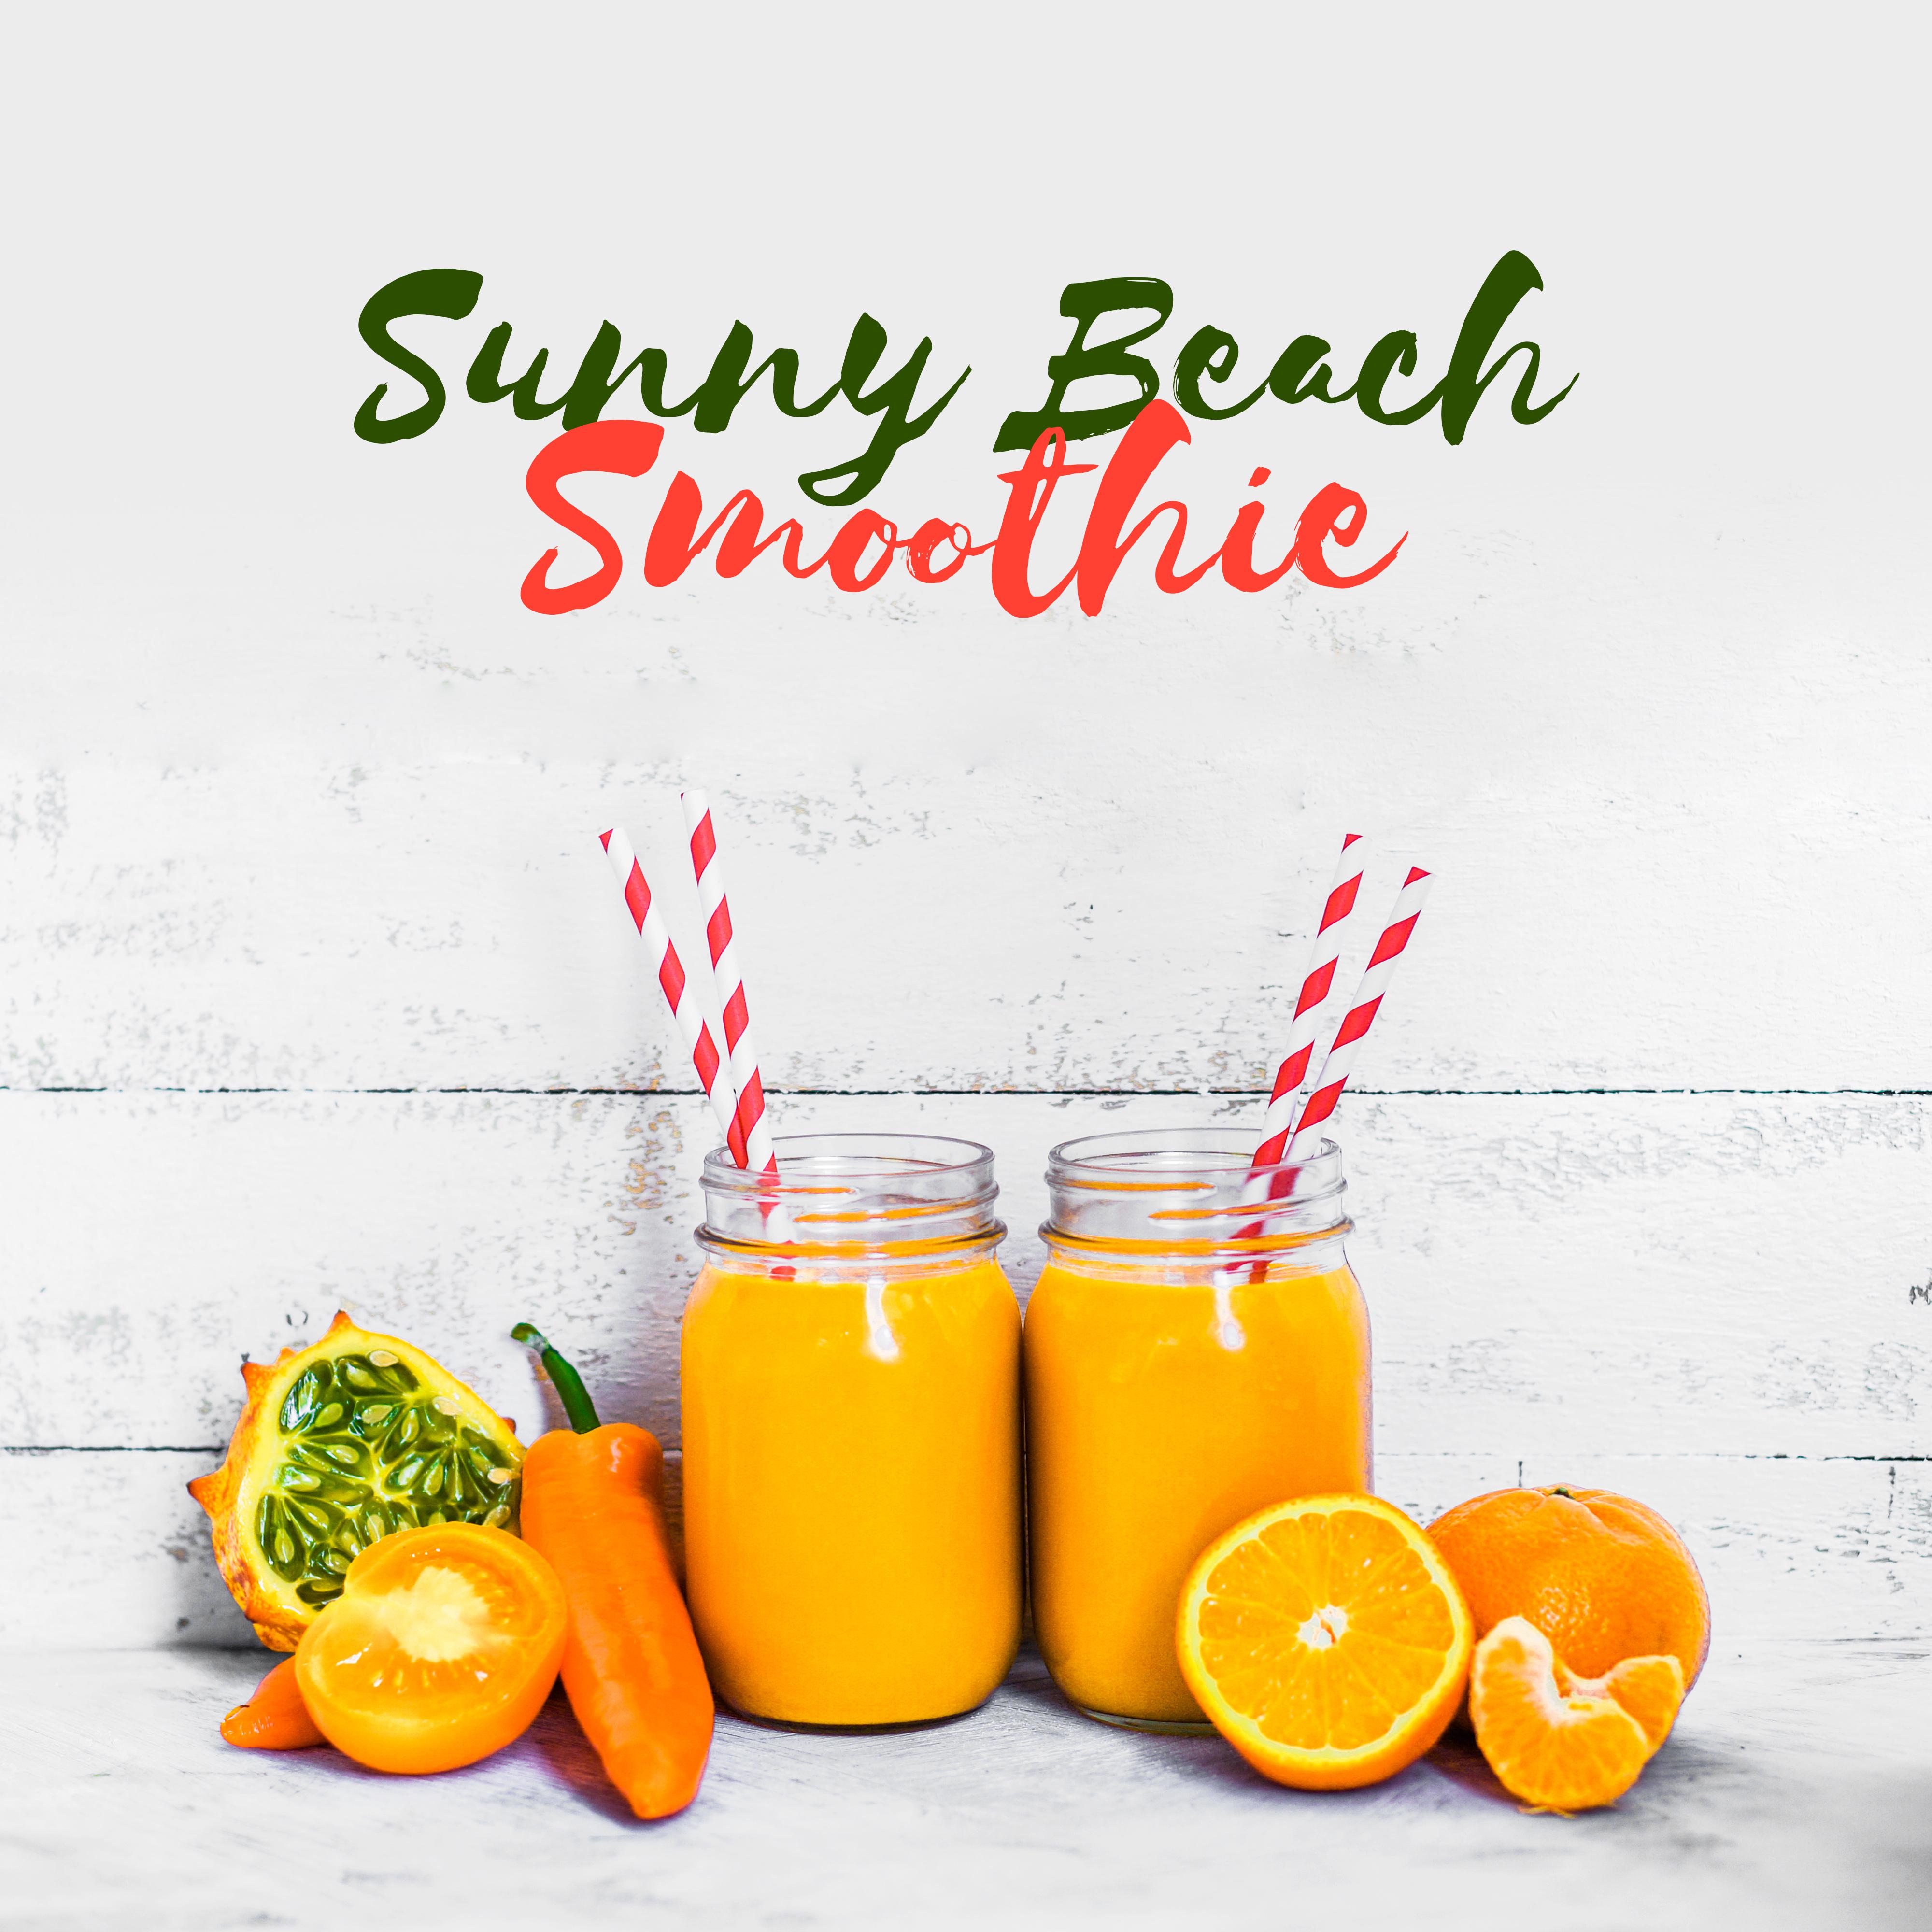 Sunny Beach Smoothie  Chill Out 2017, Ibiza Beach, Party Hits, Drink Bar Music, Summer